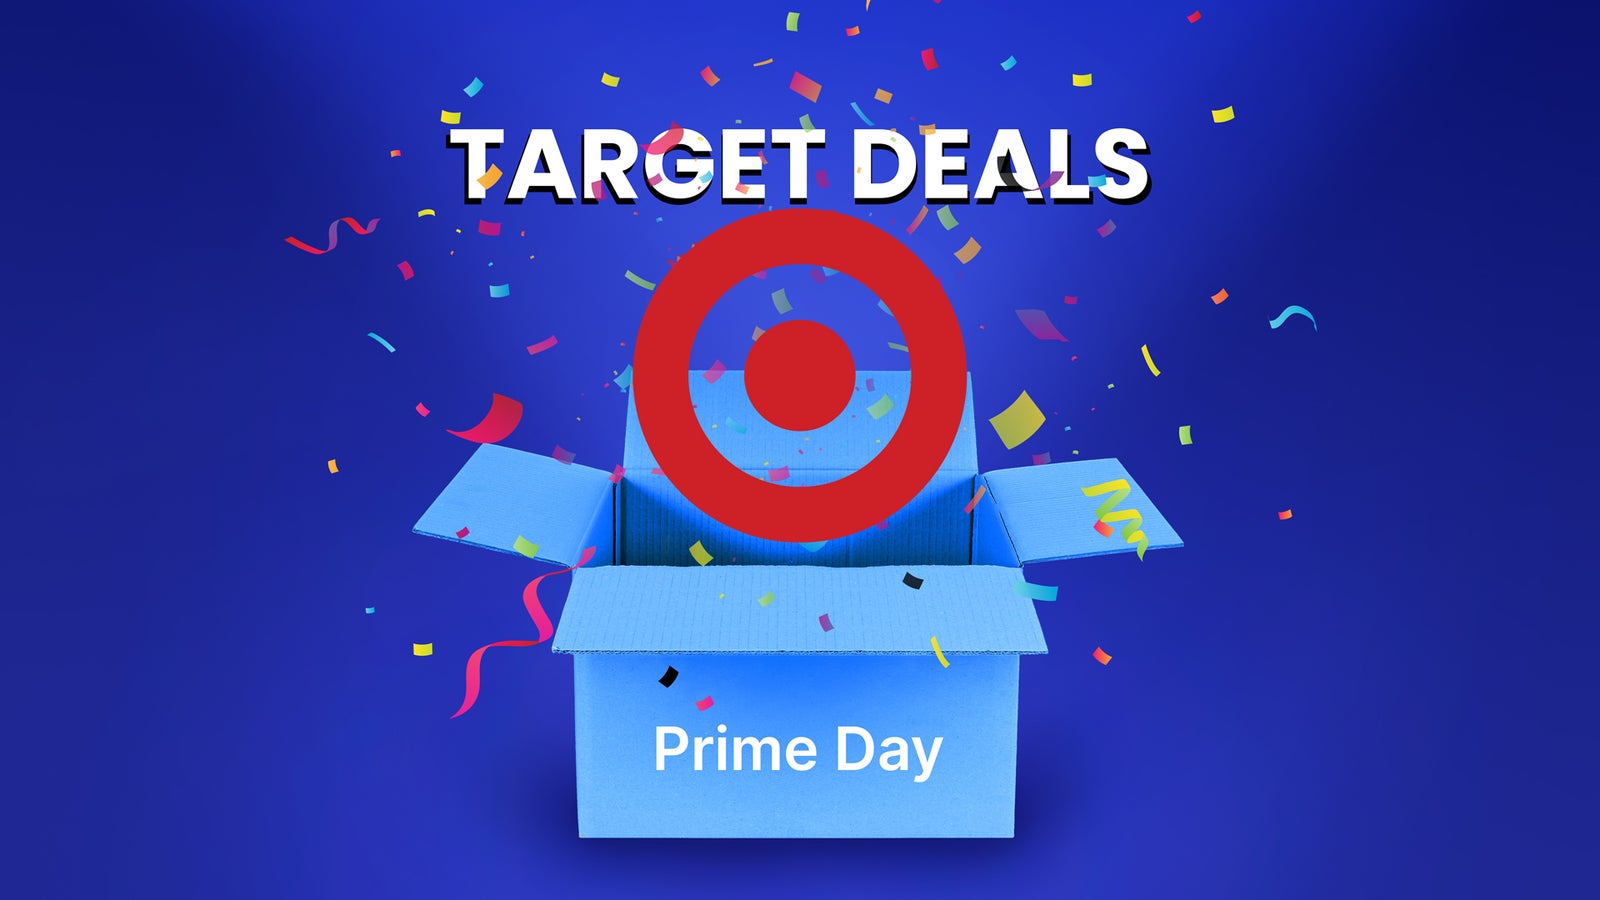 Target deals on Prime Day Deal Days is on right now! PhoneArena